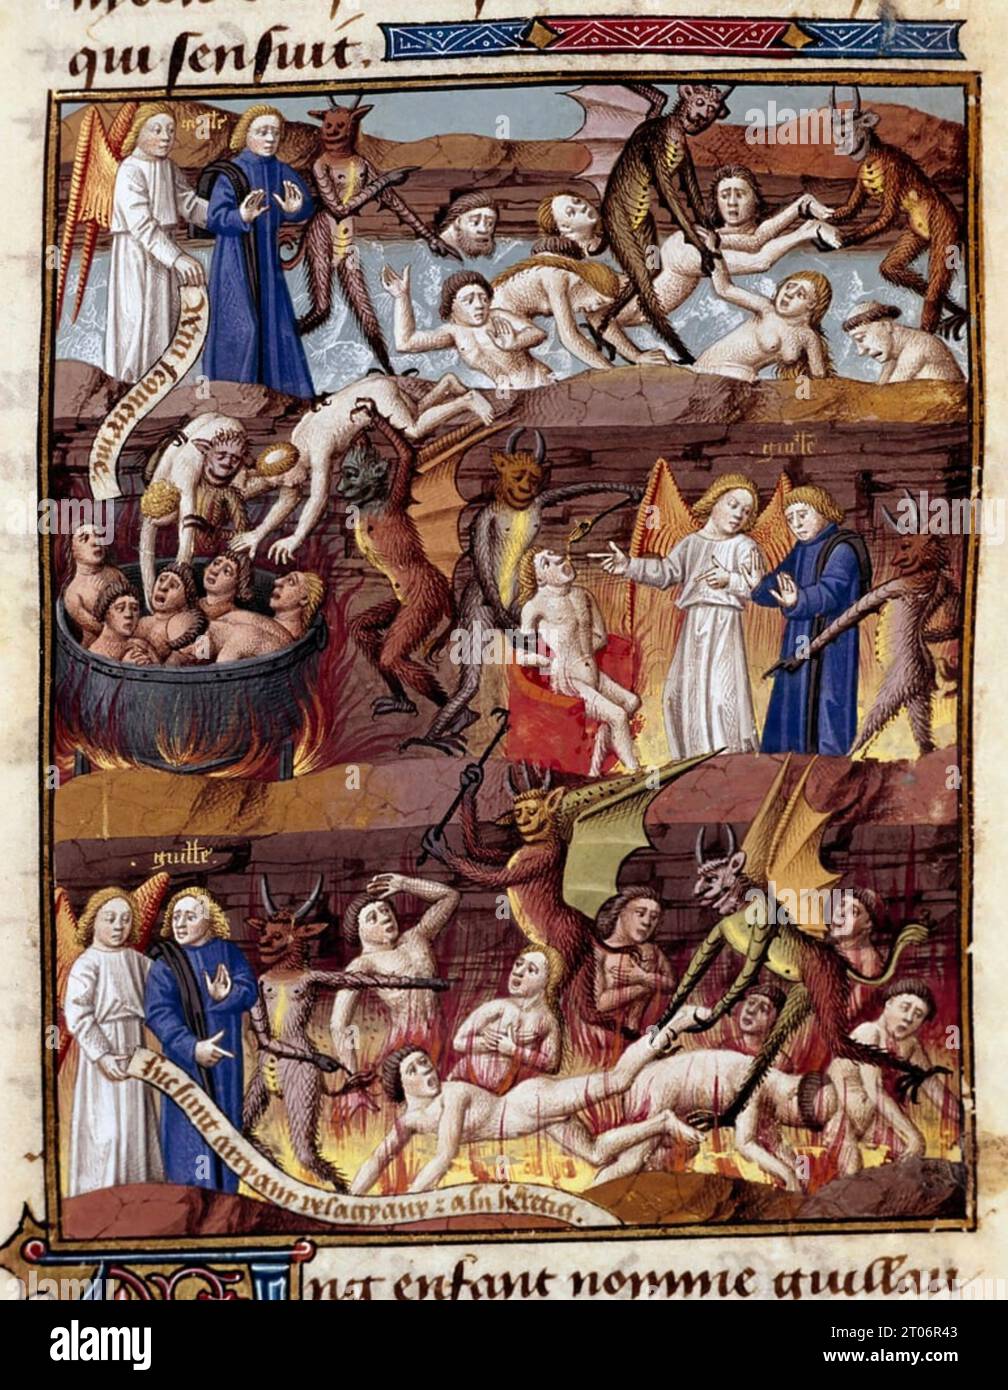 A VISION OF HELL from Speculum Historiale von Vincent de Beauvais (1190-1264) Stockfoto